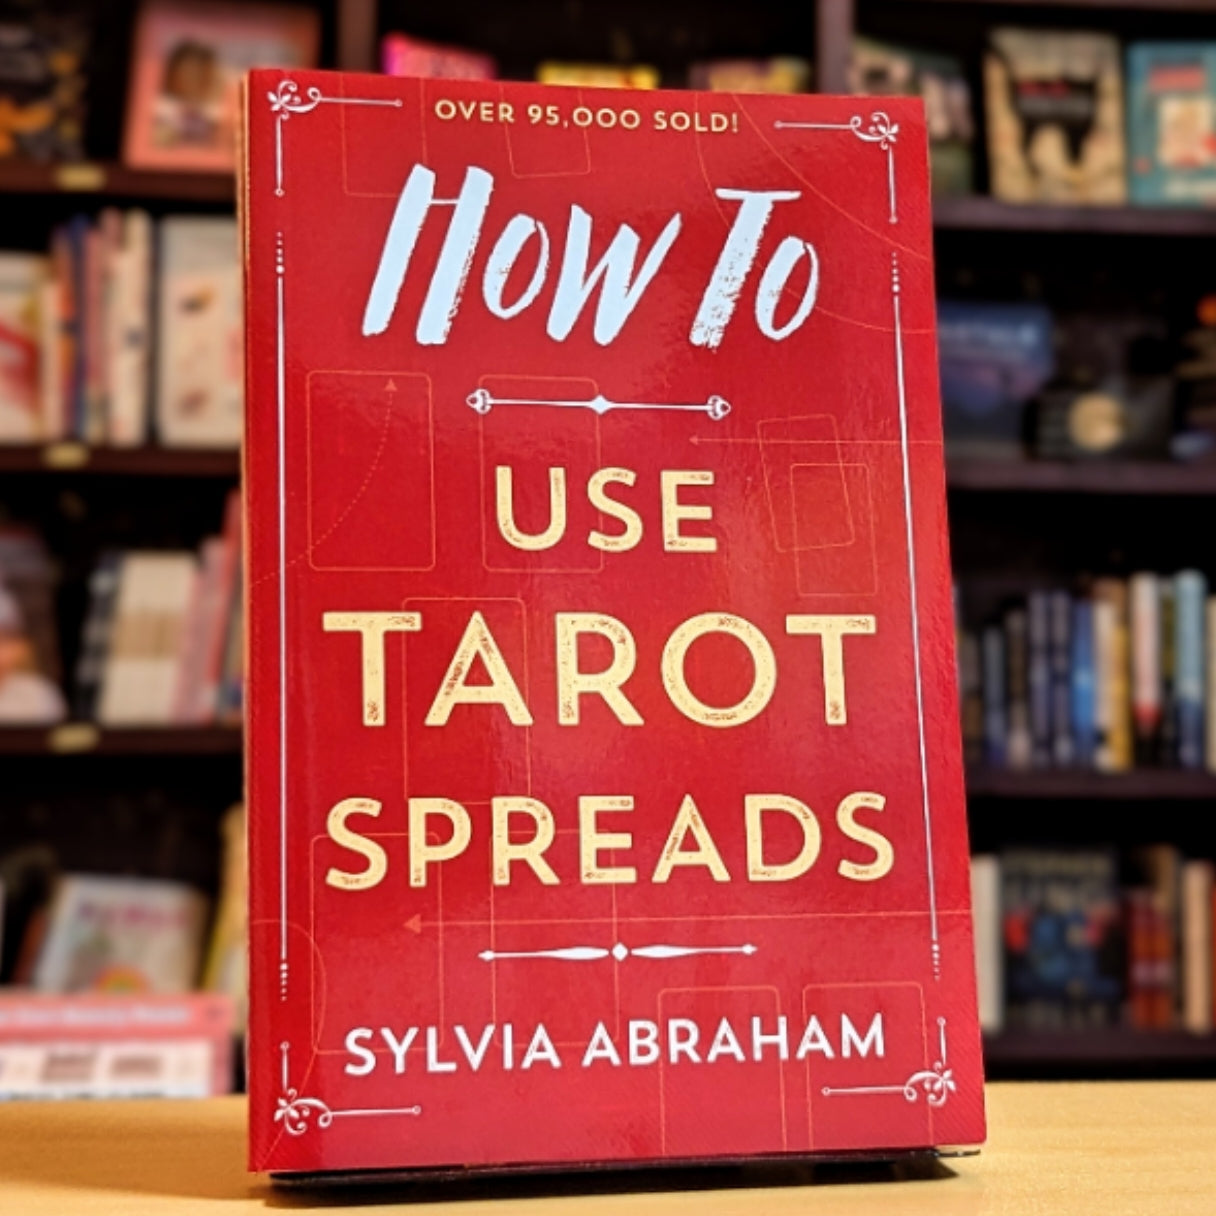 How To Use Tarot Spreads (How To Series, 9)